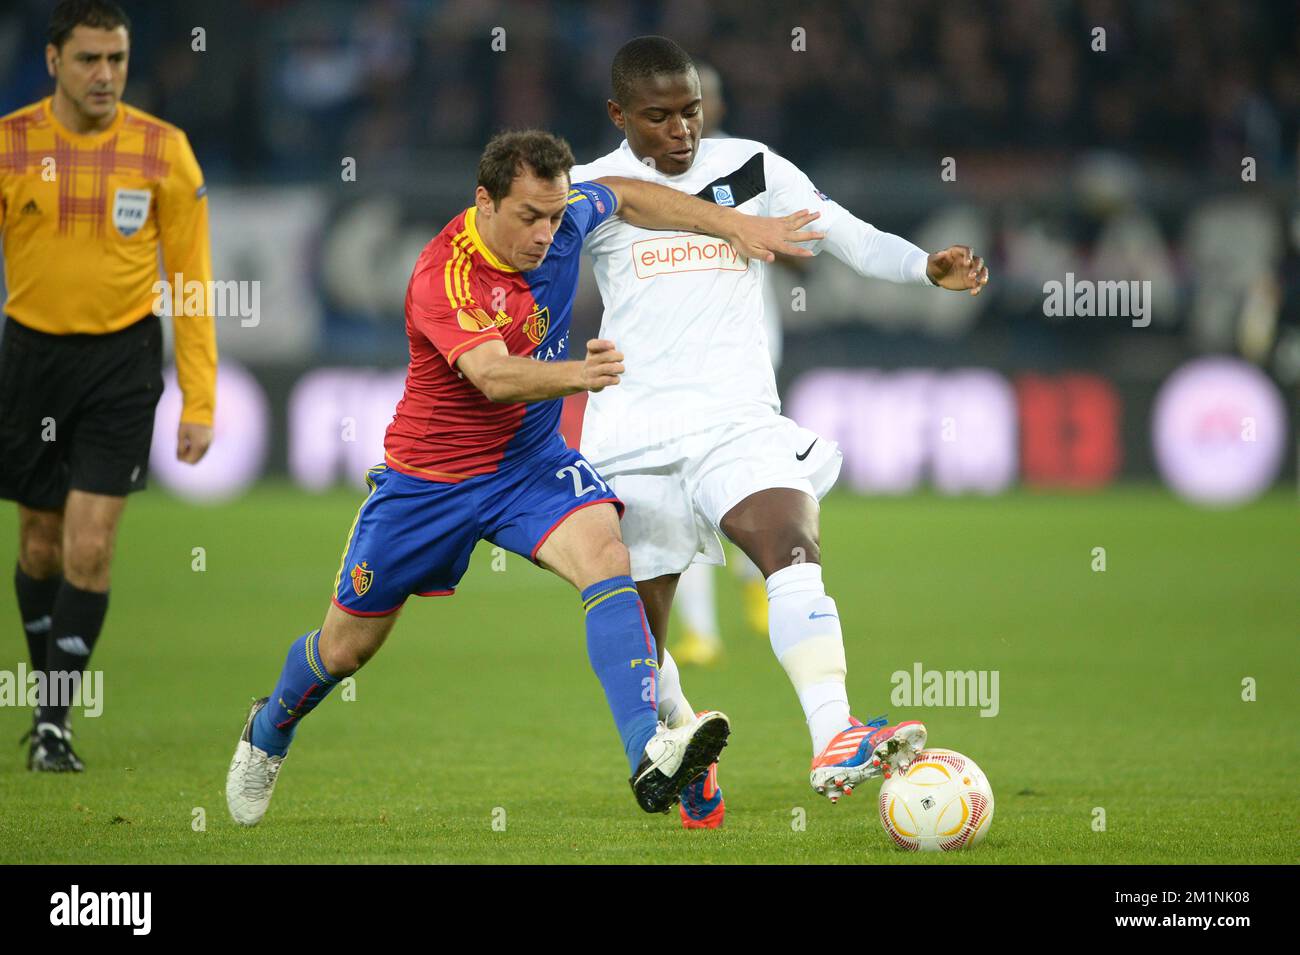 20121004 - BASEL, SWITZERLAND: Basel's Marcelo Diaz and Genk's Derrick Tshimanga fight for the ball during the match Racing Genk against FC Basel, a second game of the Europa League group stage (group G), in Basel, Switzerland, Thursday 04 October 2012. Genk won the first game and leads the group with 3 points. BELGA PHOTO YORICK JANSENS Stock Photo